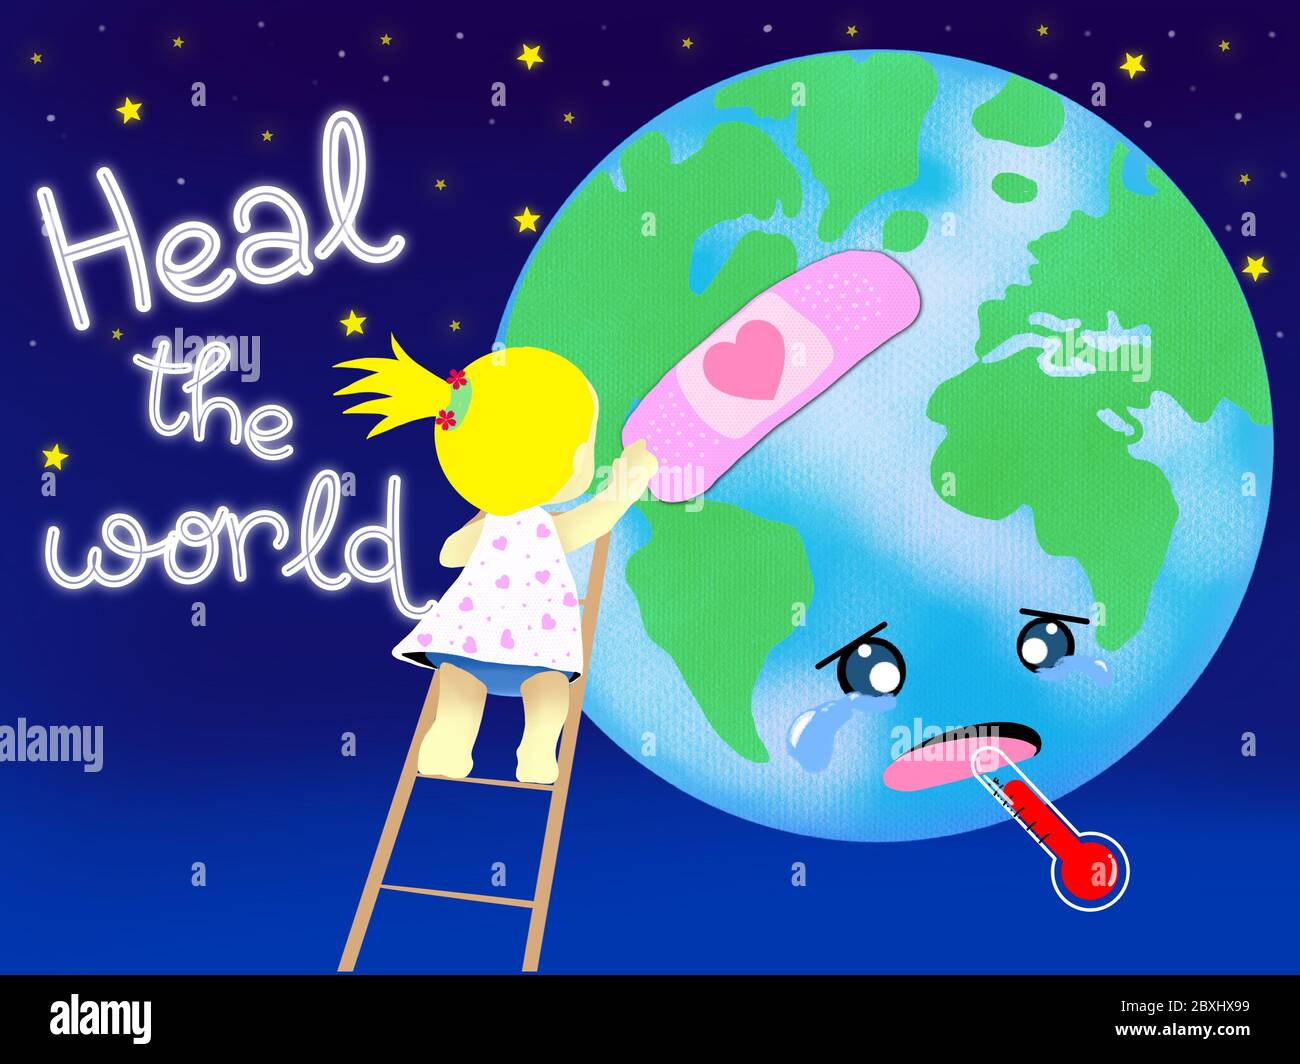 Heal the world theme, with a little kid and the globe in the night sky background Stock Photo